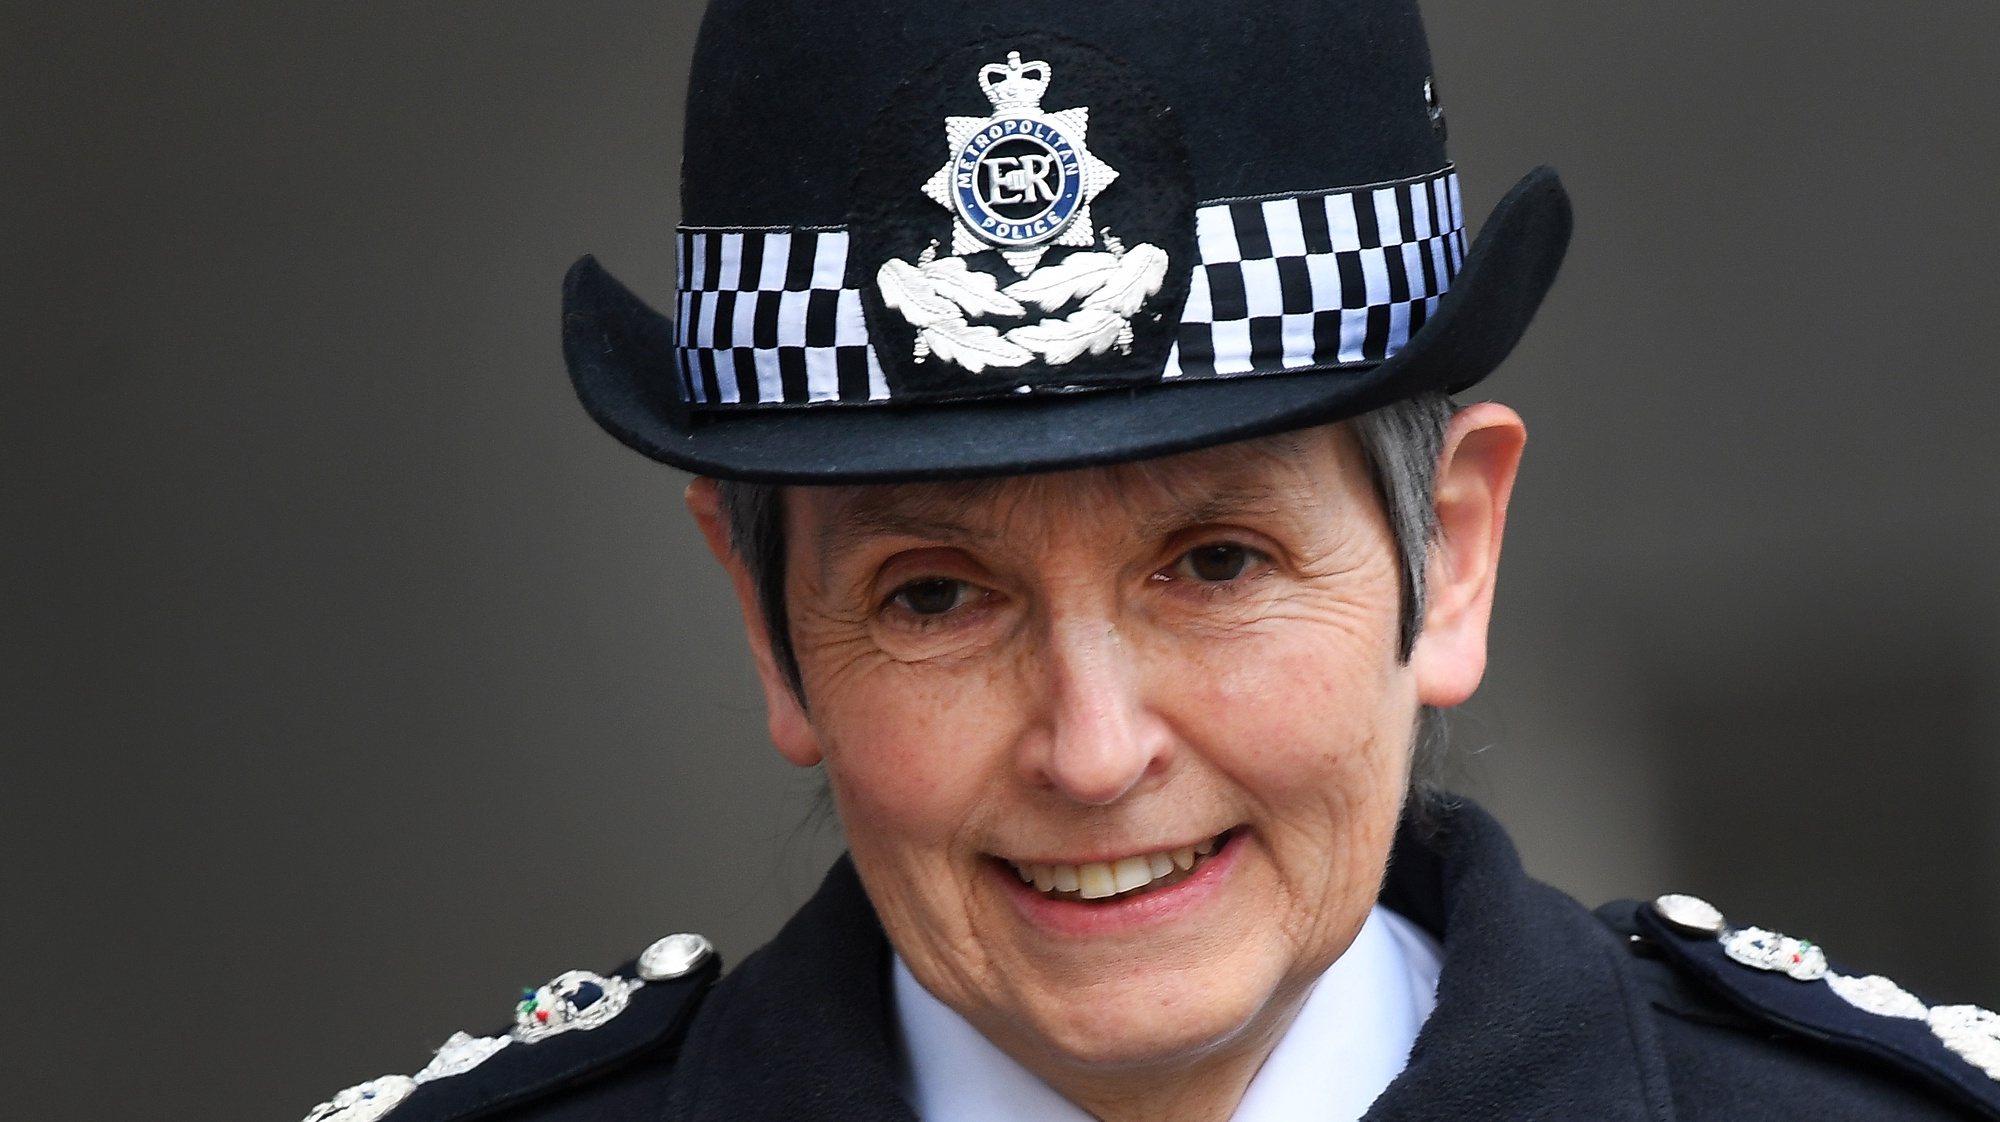 epa09743665 Met Police Chief Cressida Dick leaves the BBC studios in London, Britain, 10 February 2022. Cressida Dick faces a threat of public declaration of no confidence from Mayor of London Sadiq Khan after the Independent Office for Police Conduct (IOPC) has found evidence of misogyny, bullying, discrimination and sexual harassment.  EPA/ANDY RAIN